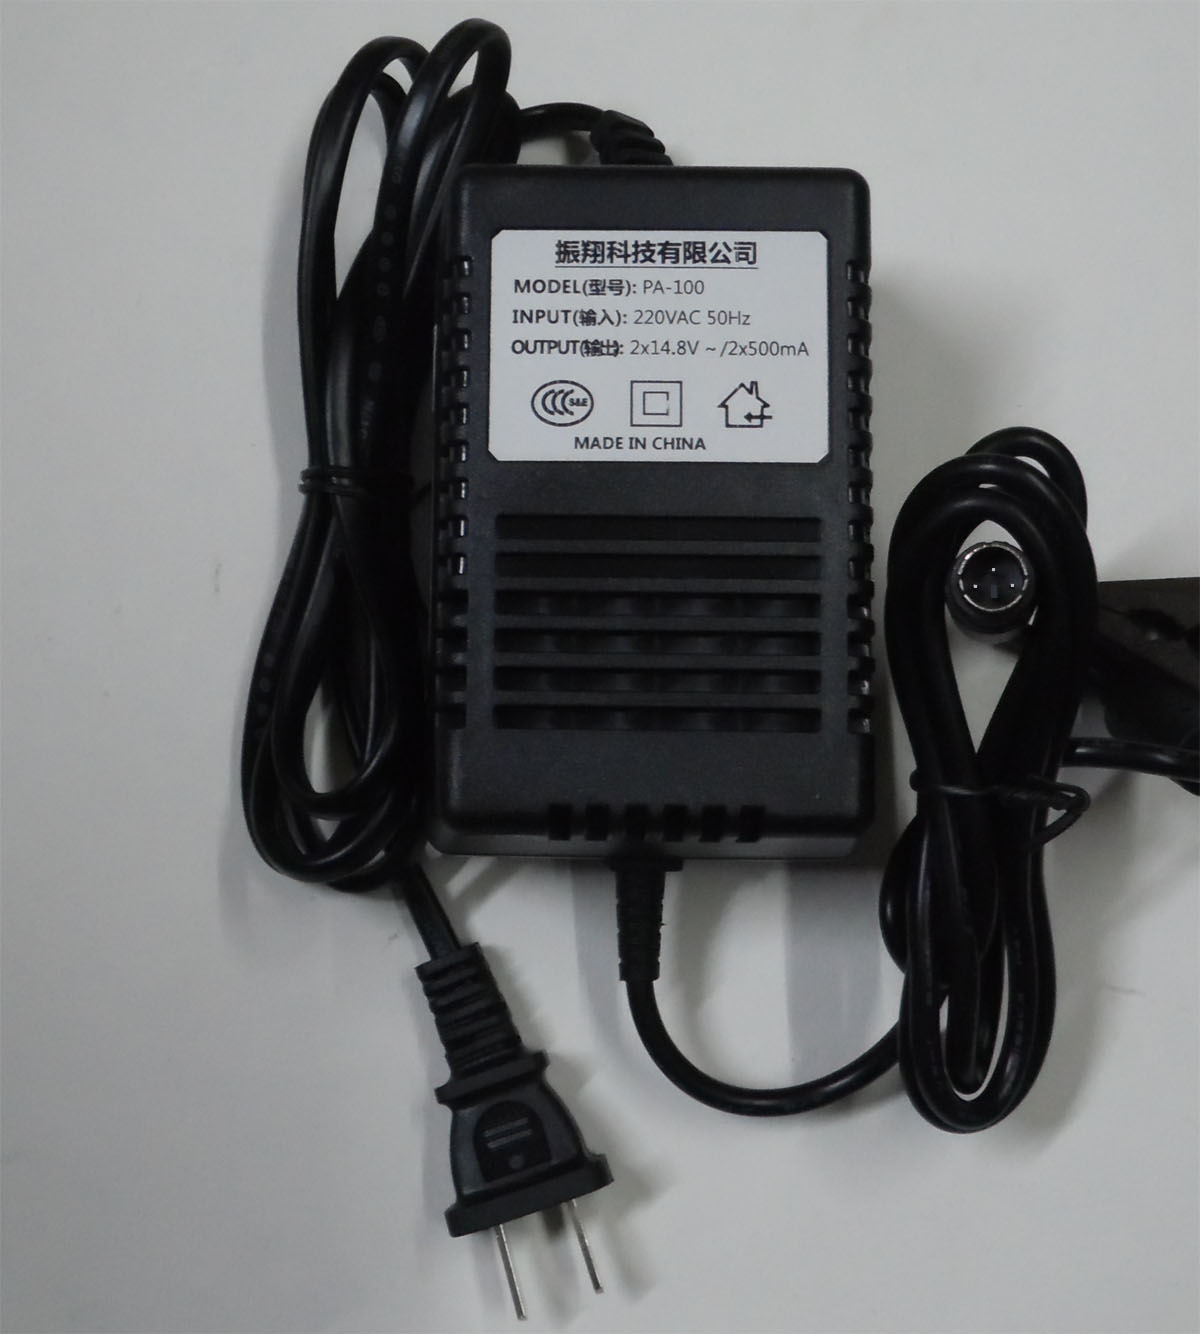 New XENYX1002FX 1202FX PA-100 Behringer AC/DC POWER SUPPLY ADAPTER